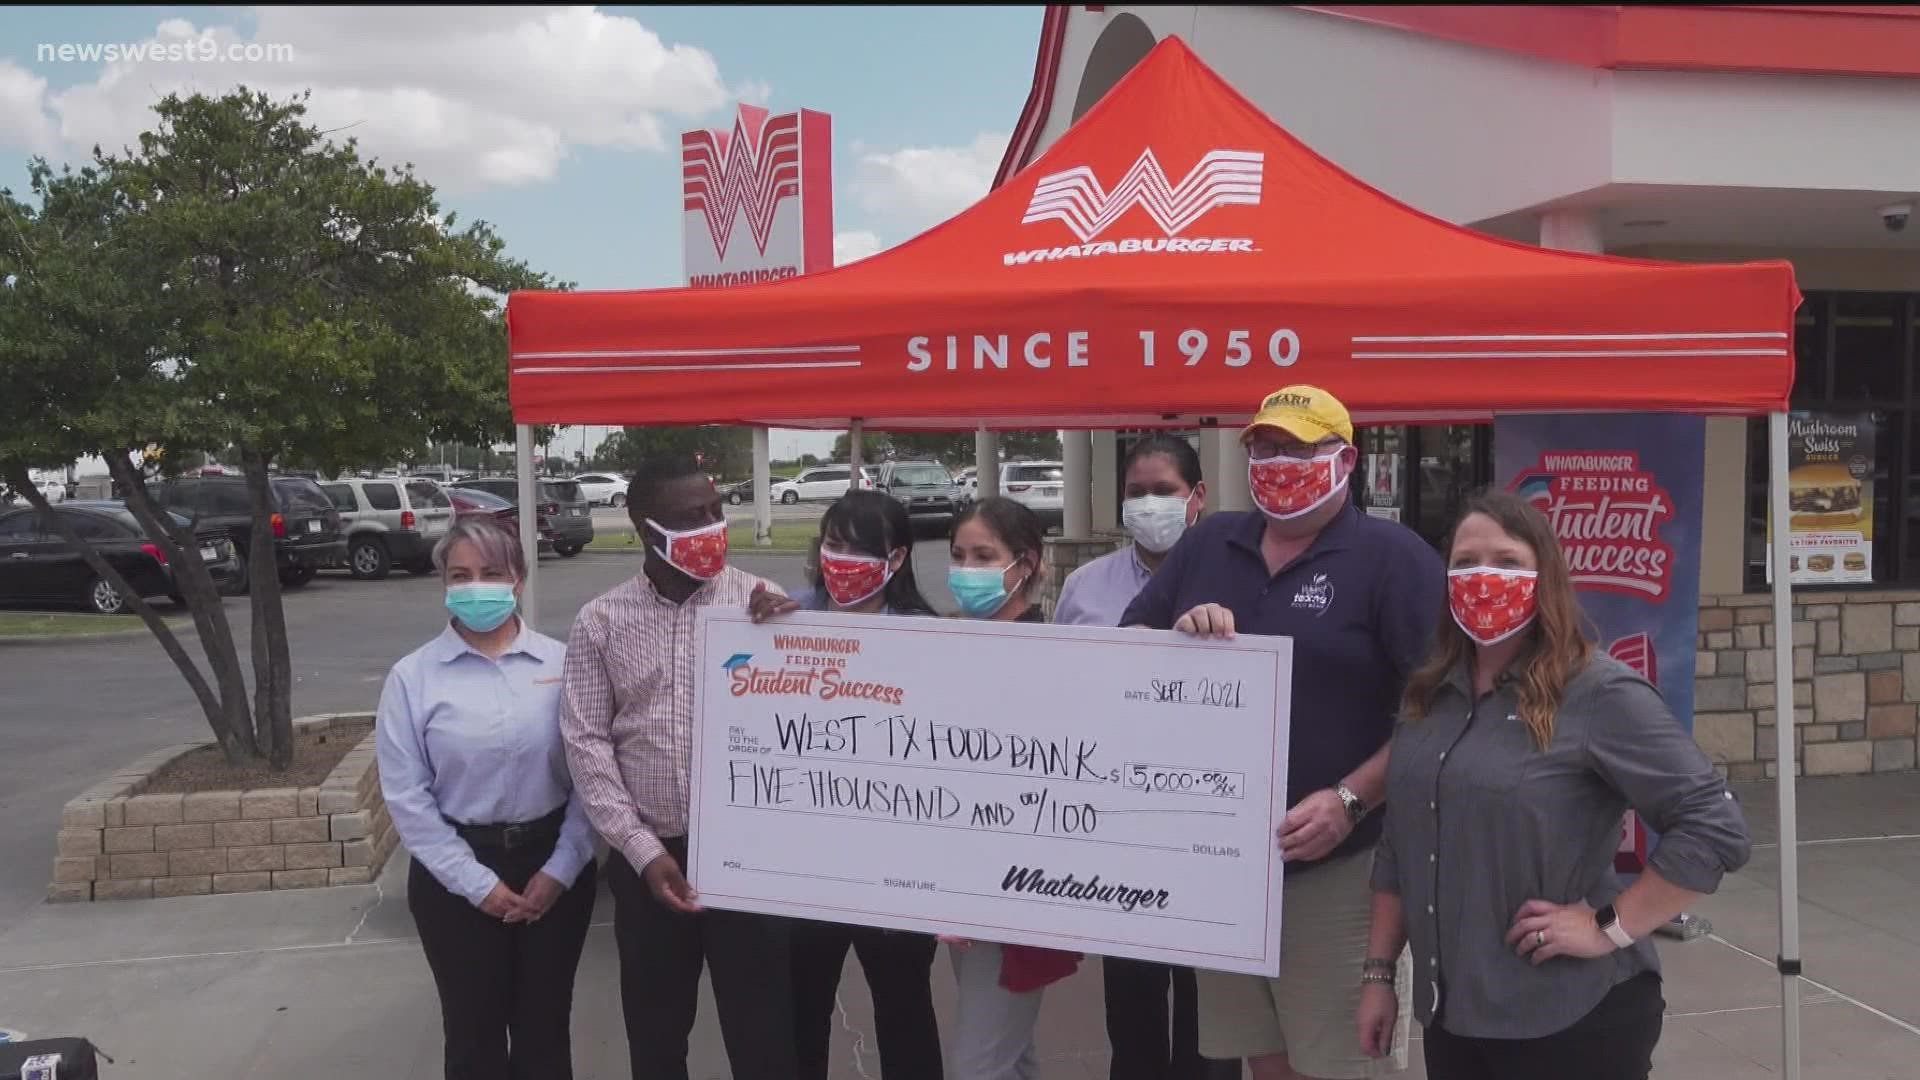 Whataburger will be giving $5,000 to the West Texas Food Bank for their Food 2 kids programs.